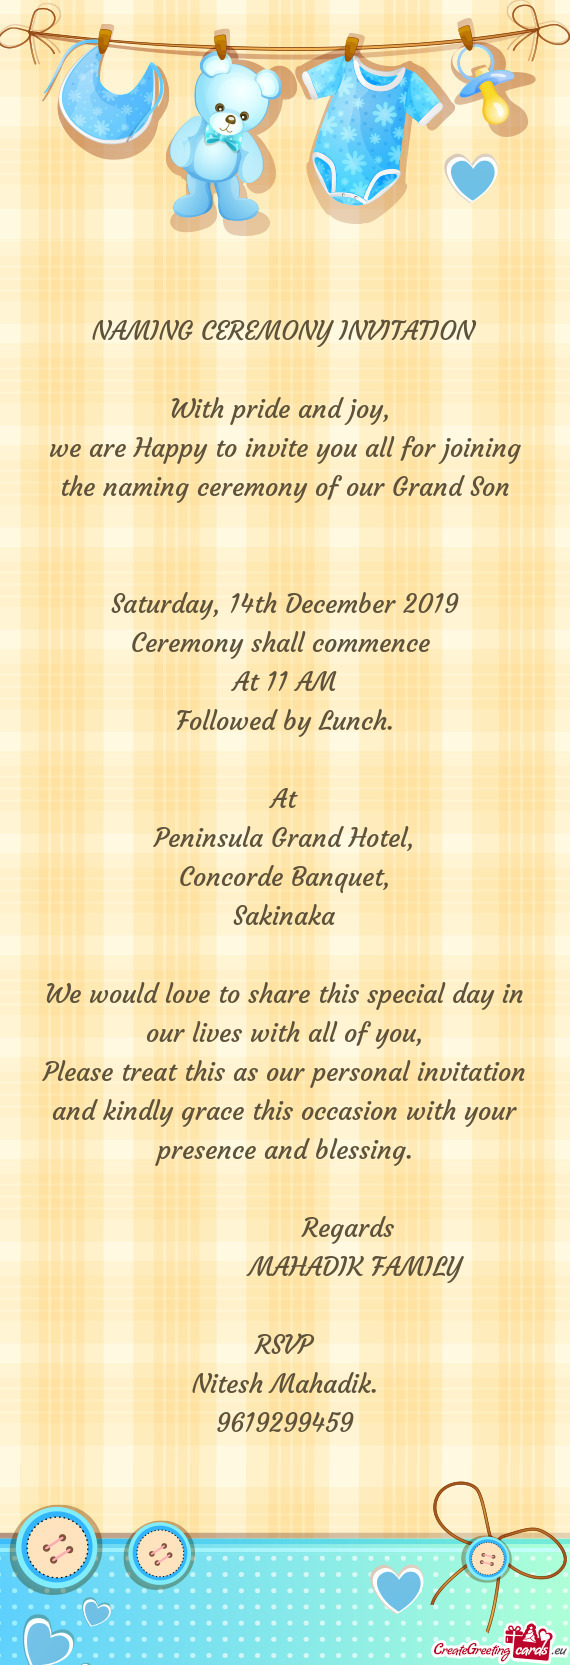 We would love to share this special day in our lives with all of you